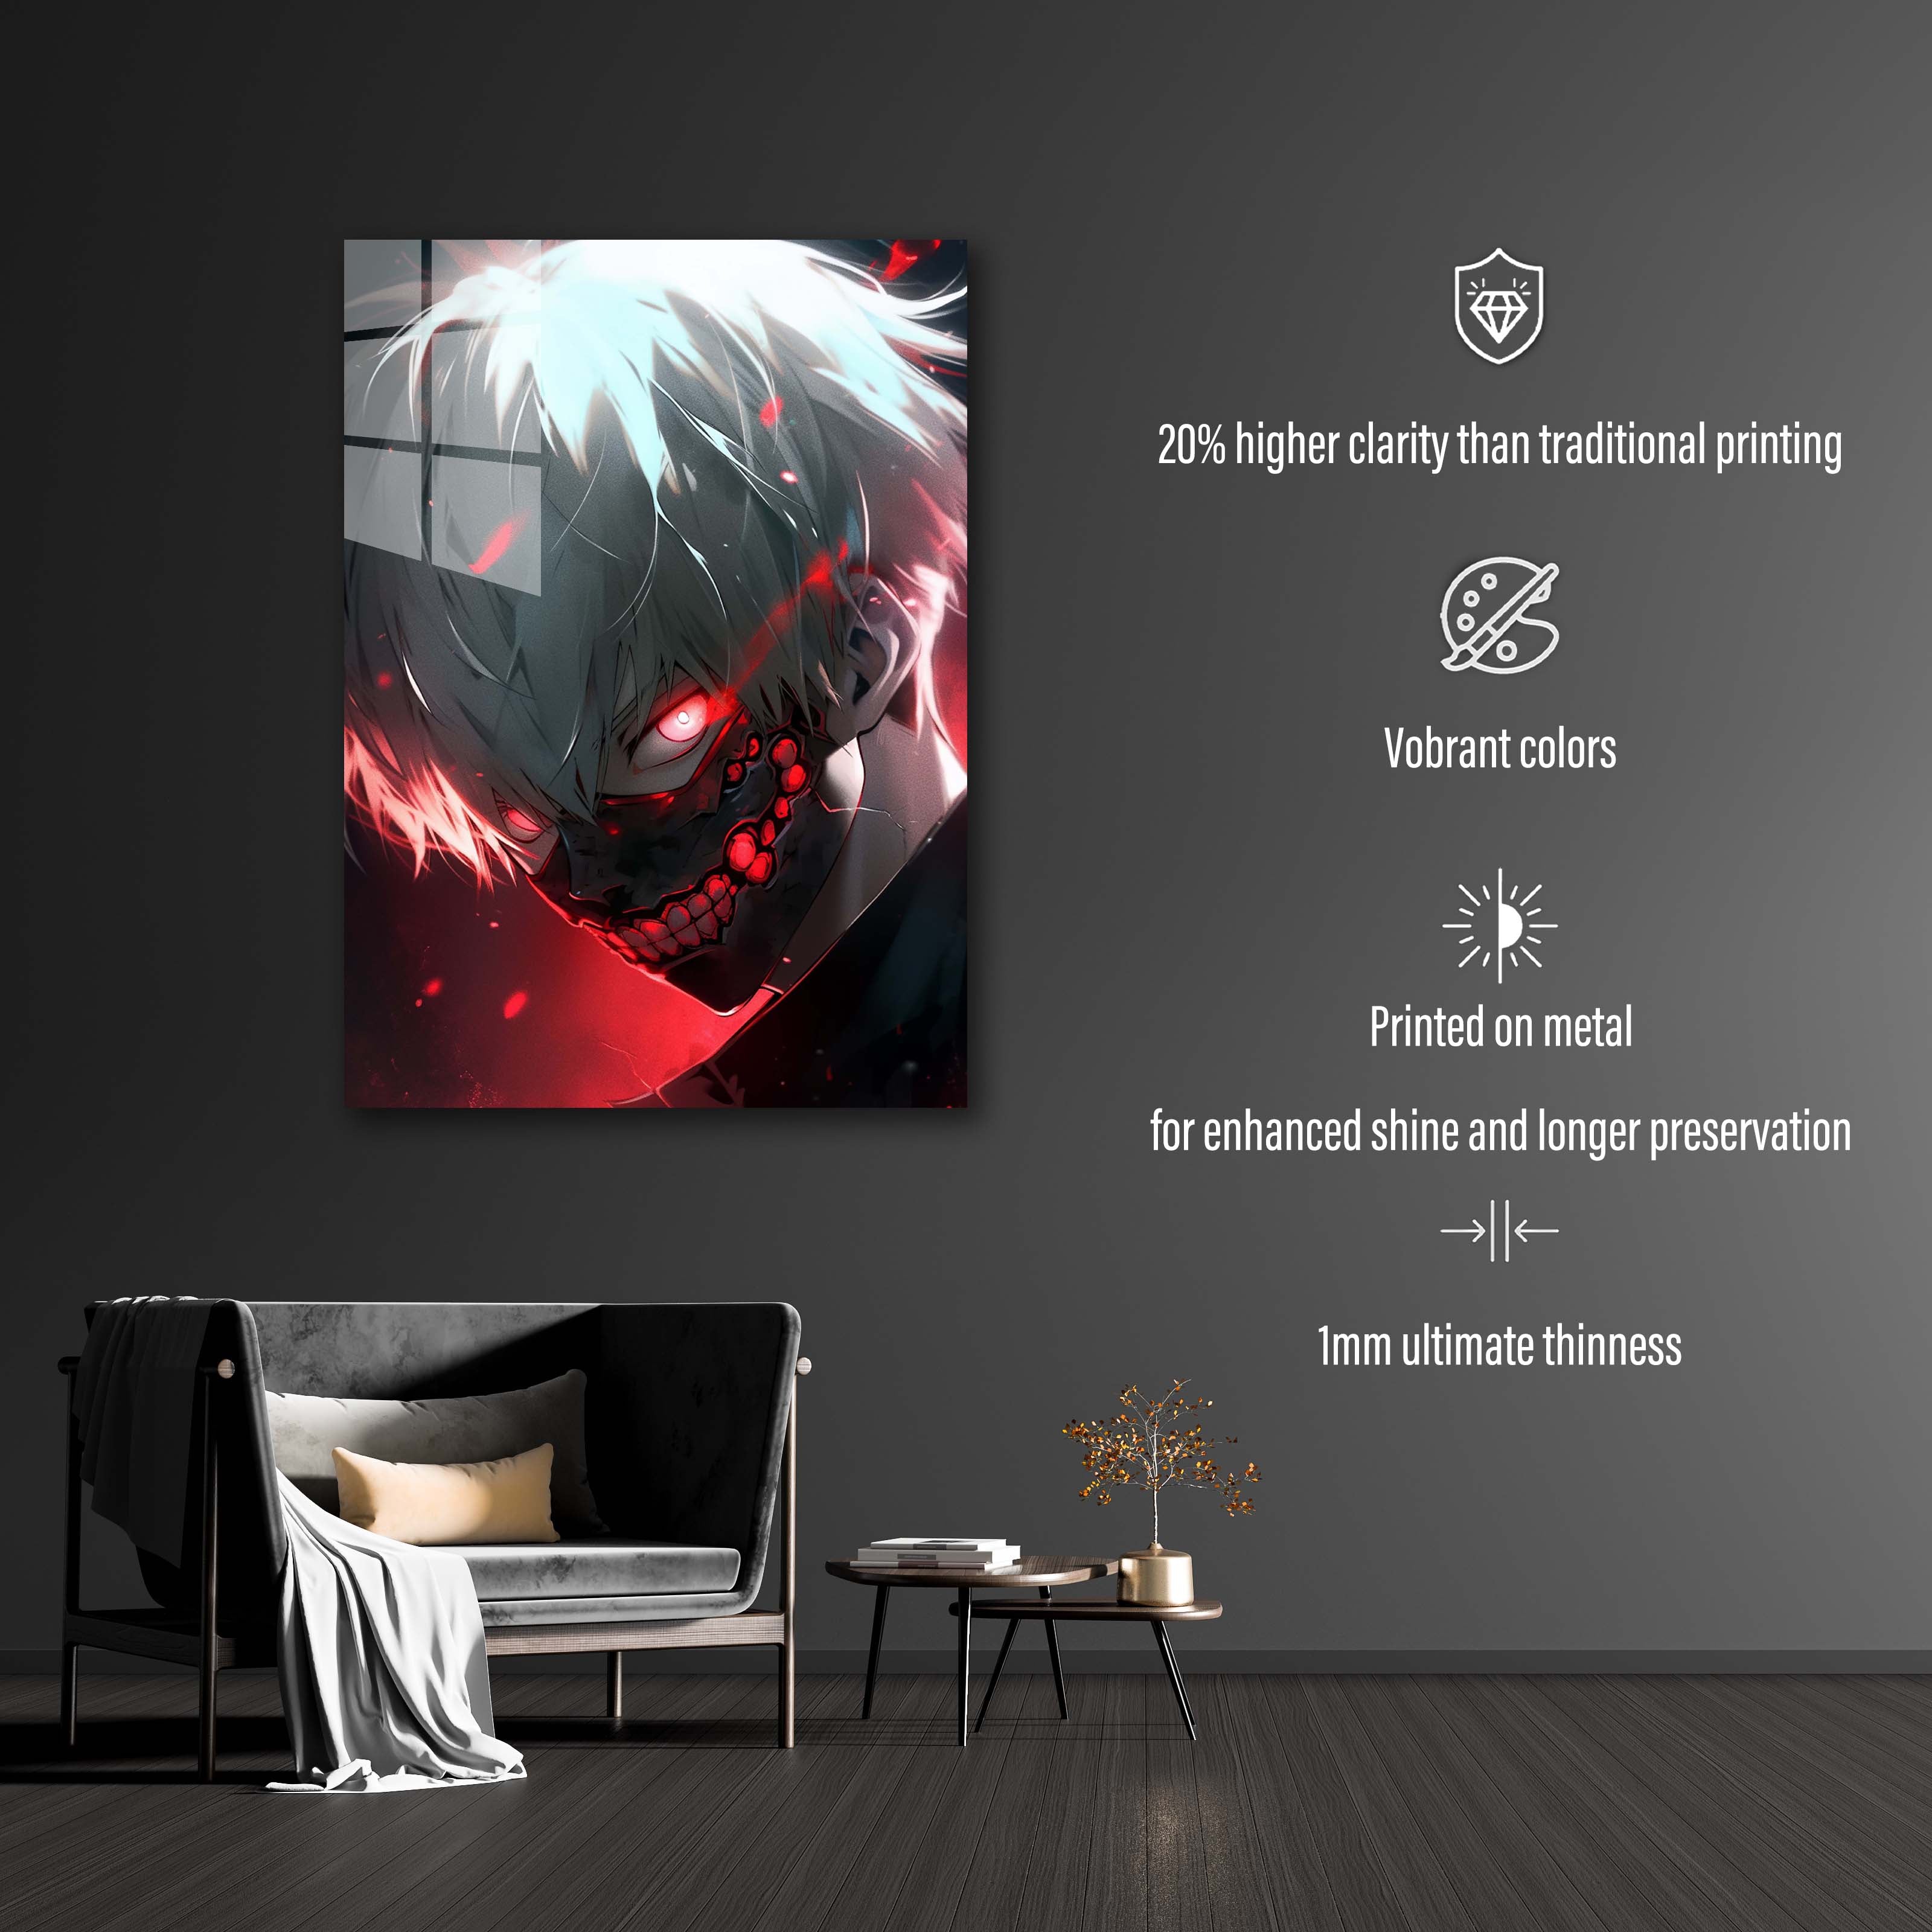 Tokyo's Tragedy_ Kaneki's Ghoul Chronicles-designed by @theanimecrossover